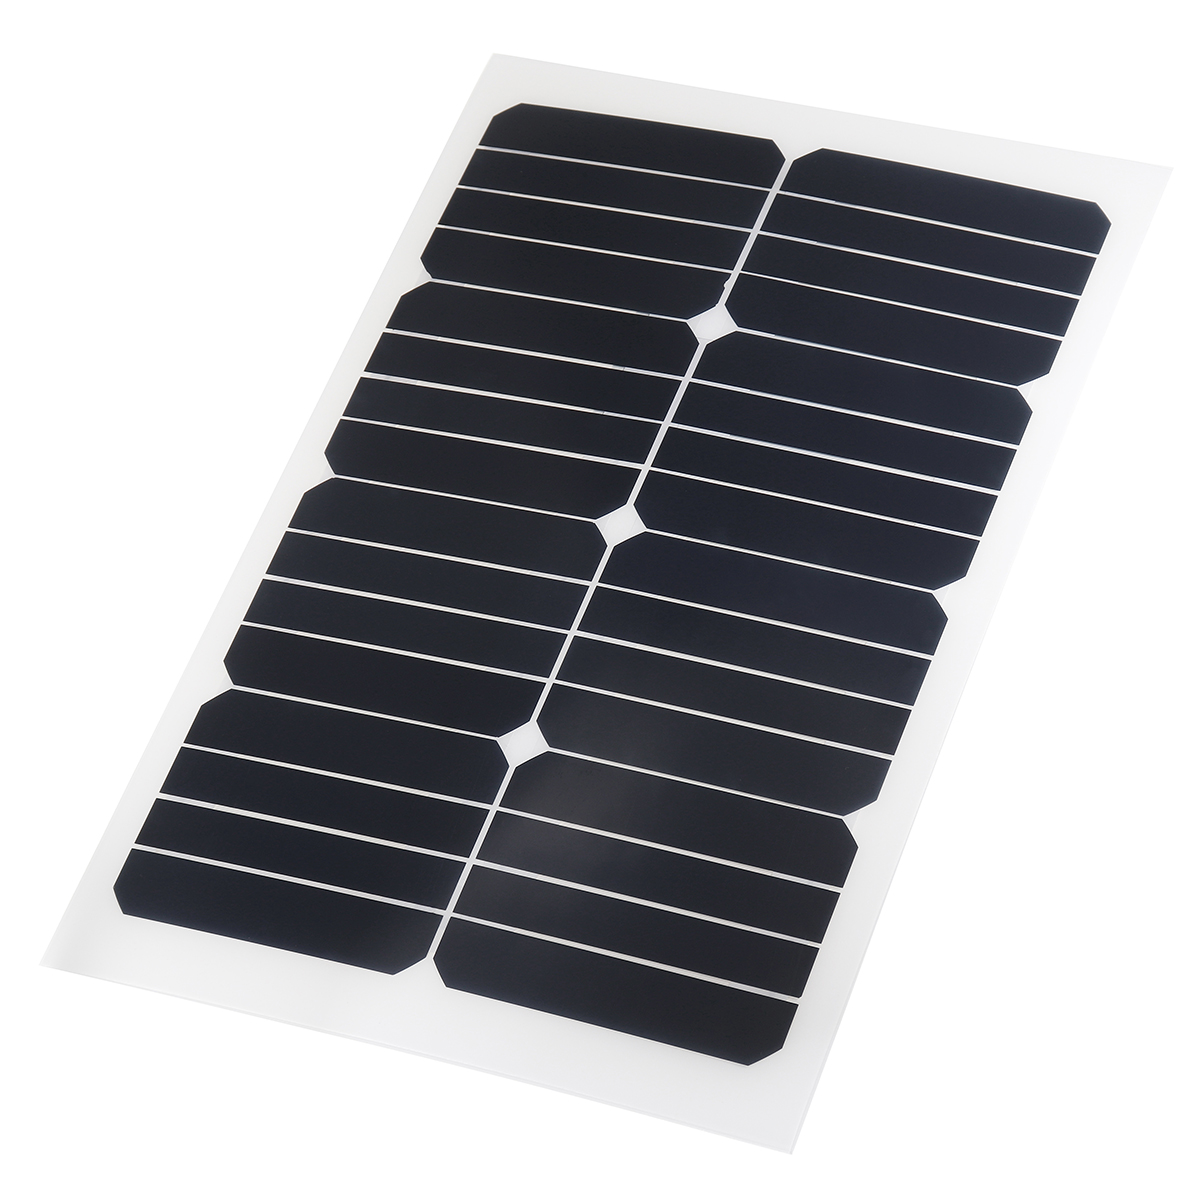 20W-12V-Mono-Semi-Flexible-Solar-Panel-Battery-Charger-For-w-Car-Boat-Charger-1337273-5